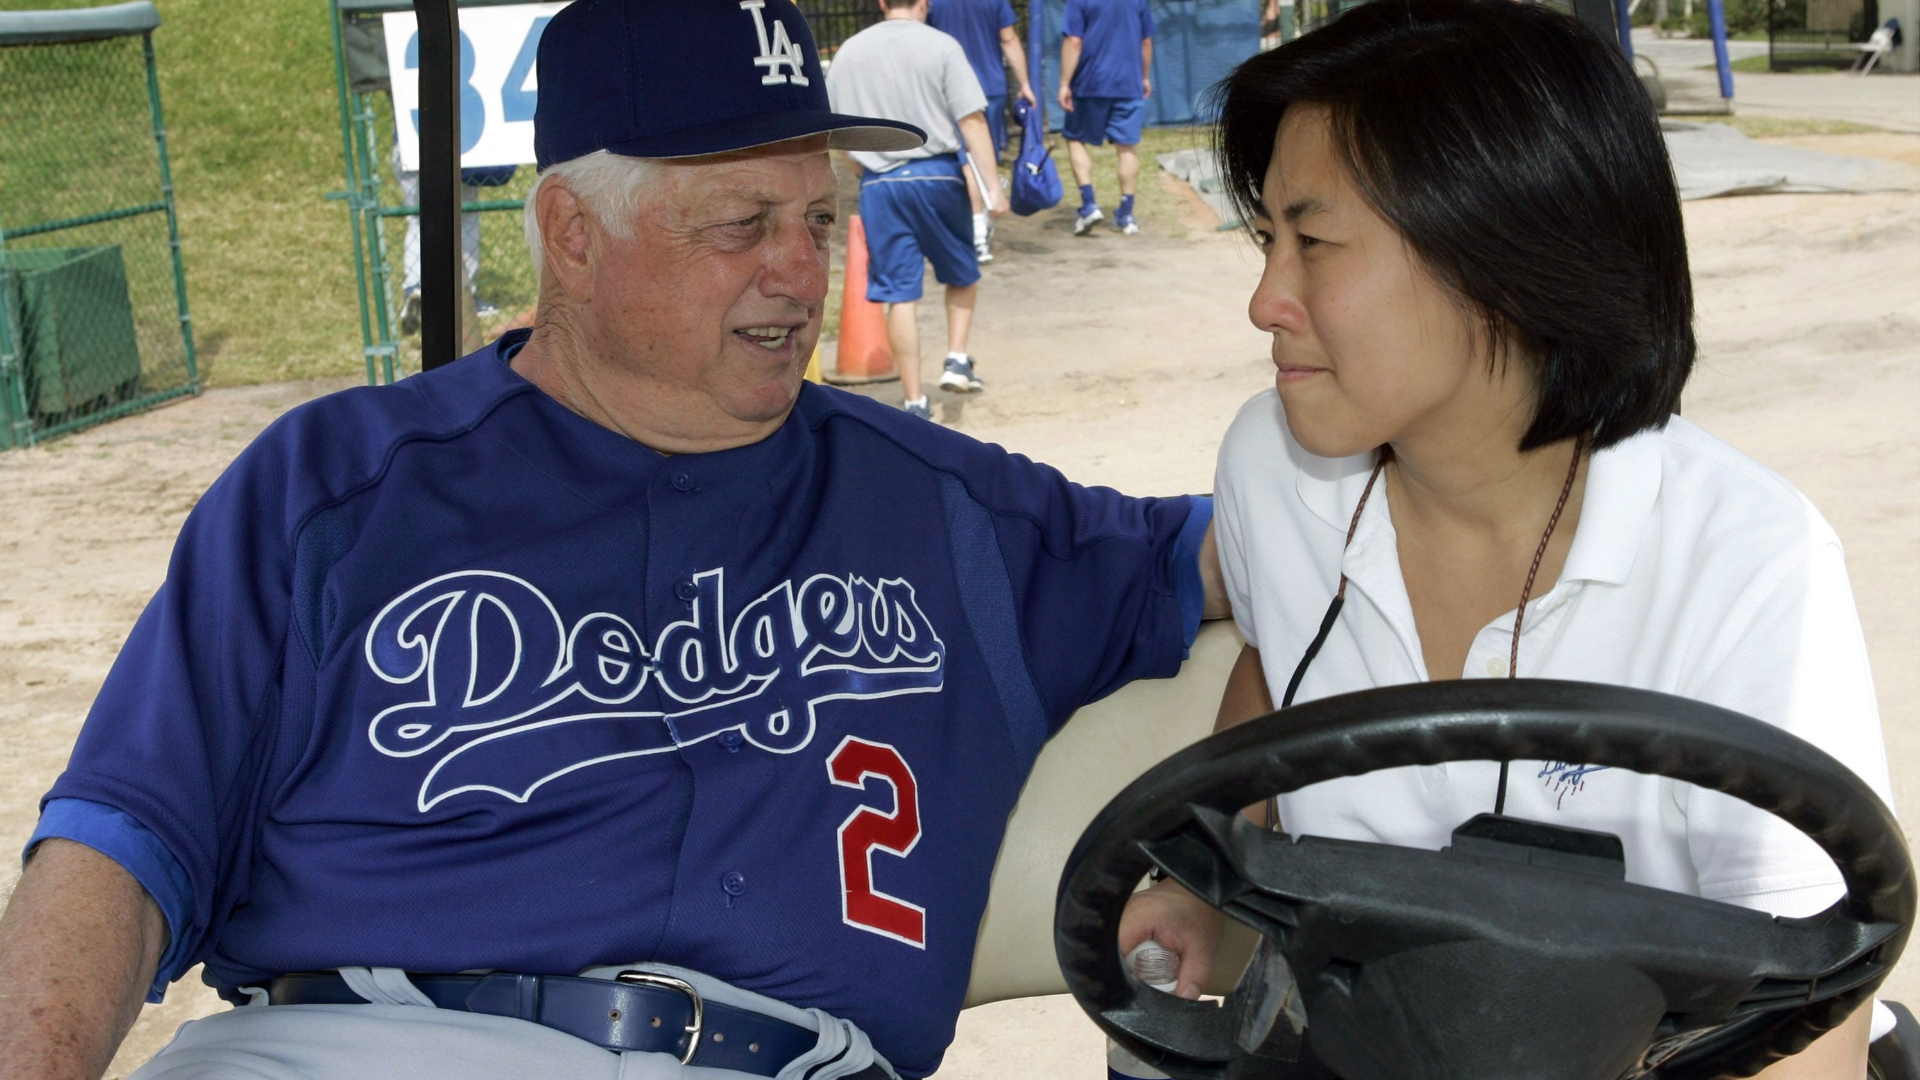 Lasorda, fiery Hall of Fame Dodgers manager, dies at 93